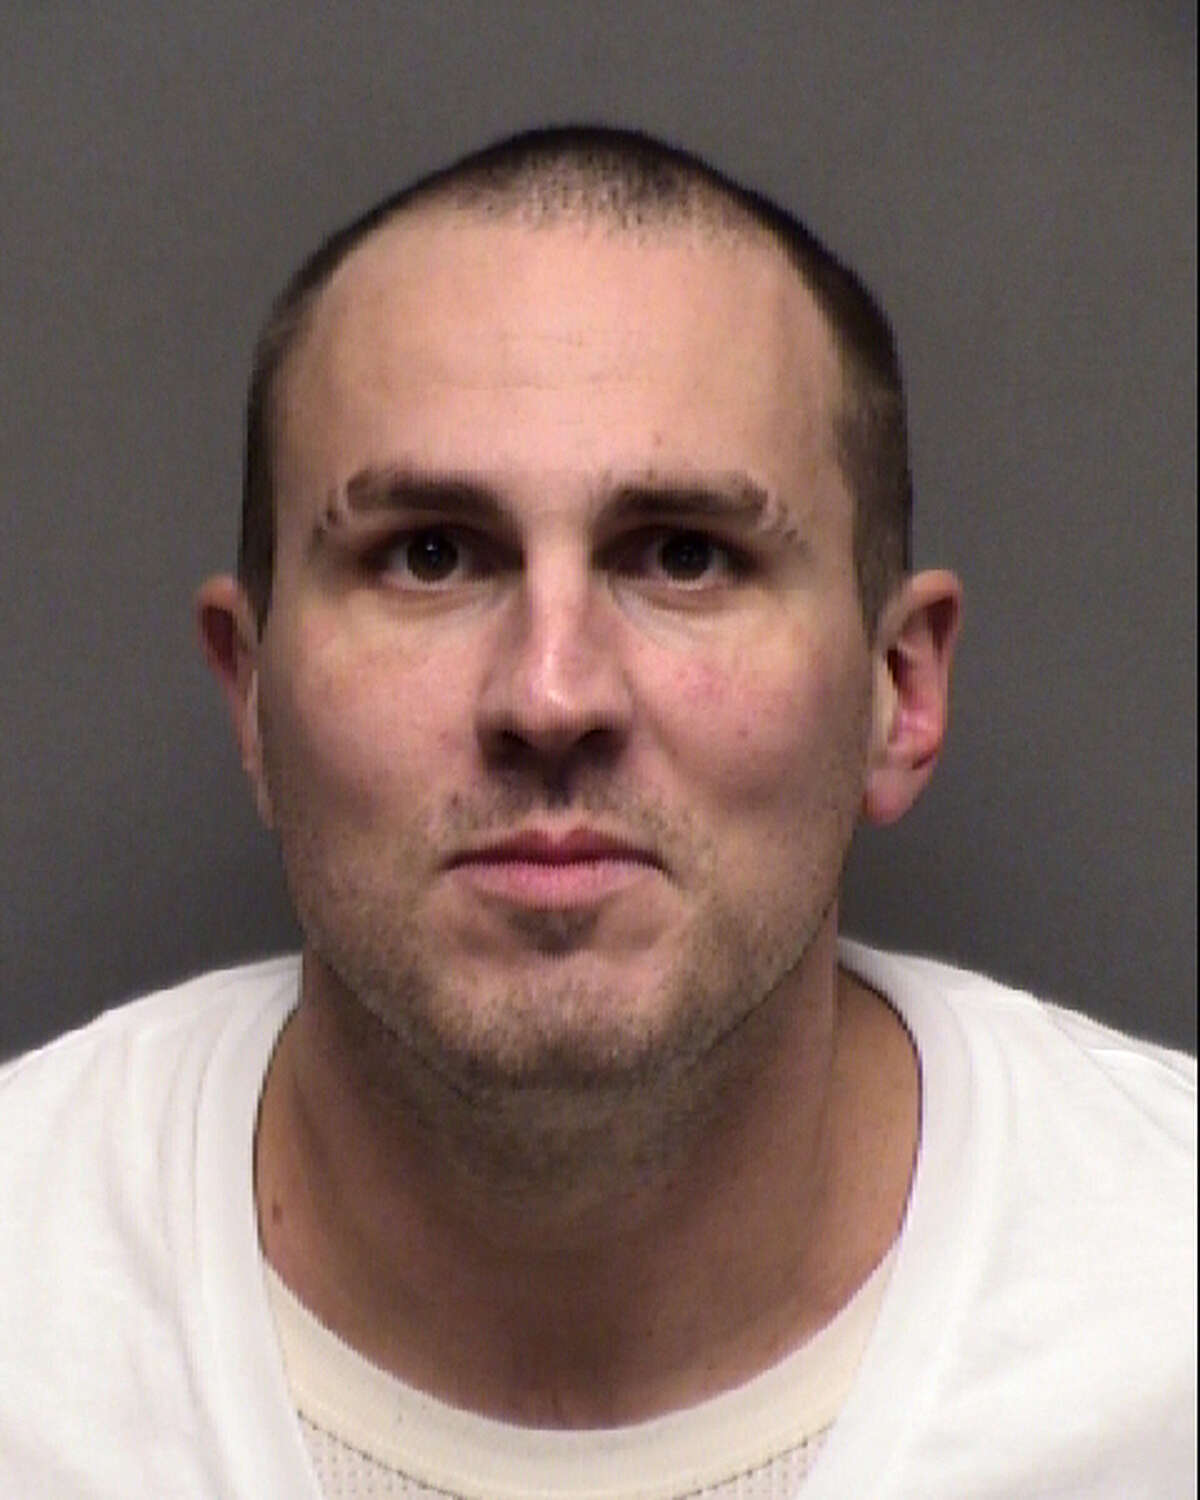 Andrew Taylor Ford, 32, was released from the Bexar County Jail on Jan. 3 despite a hold out of San Patricio County, according to sheriff's office officials.